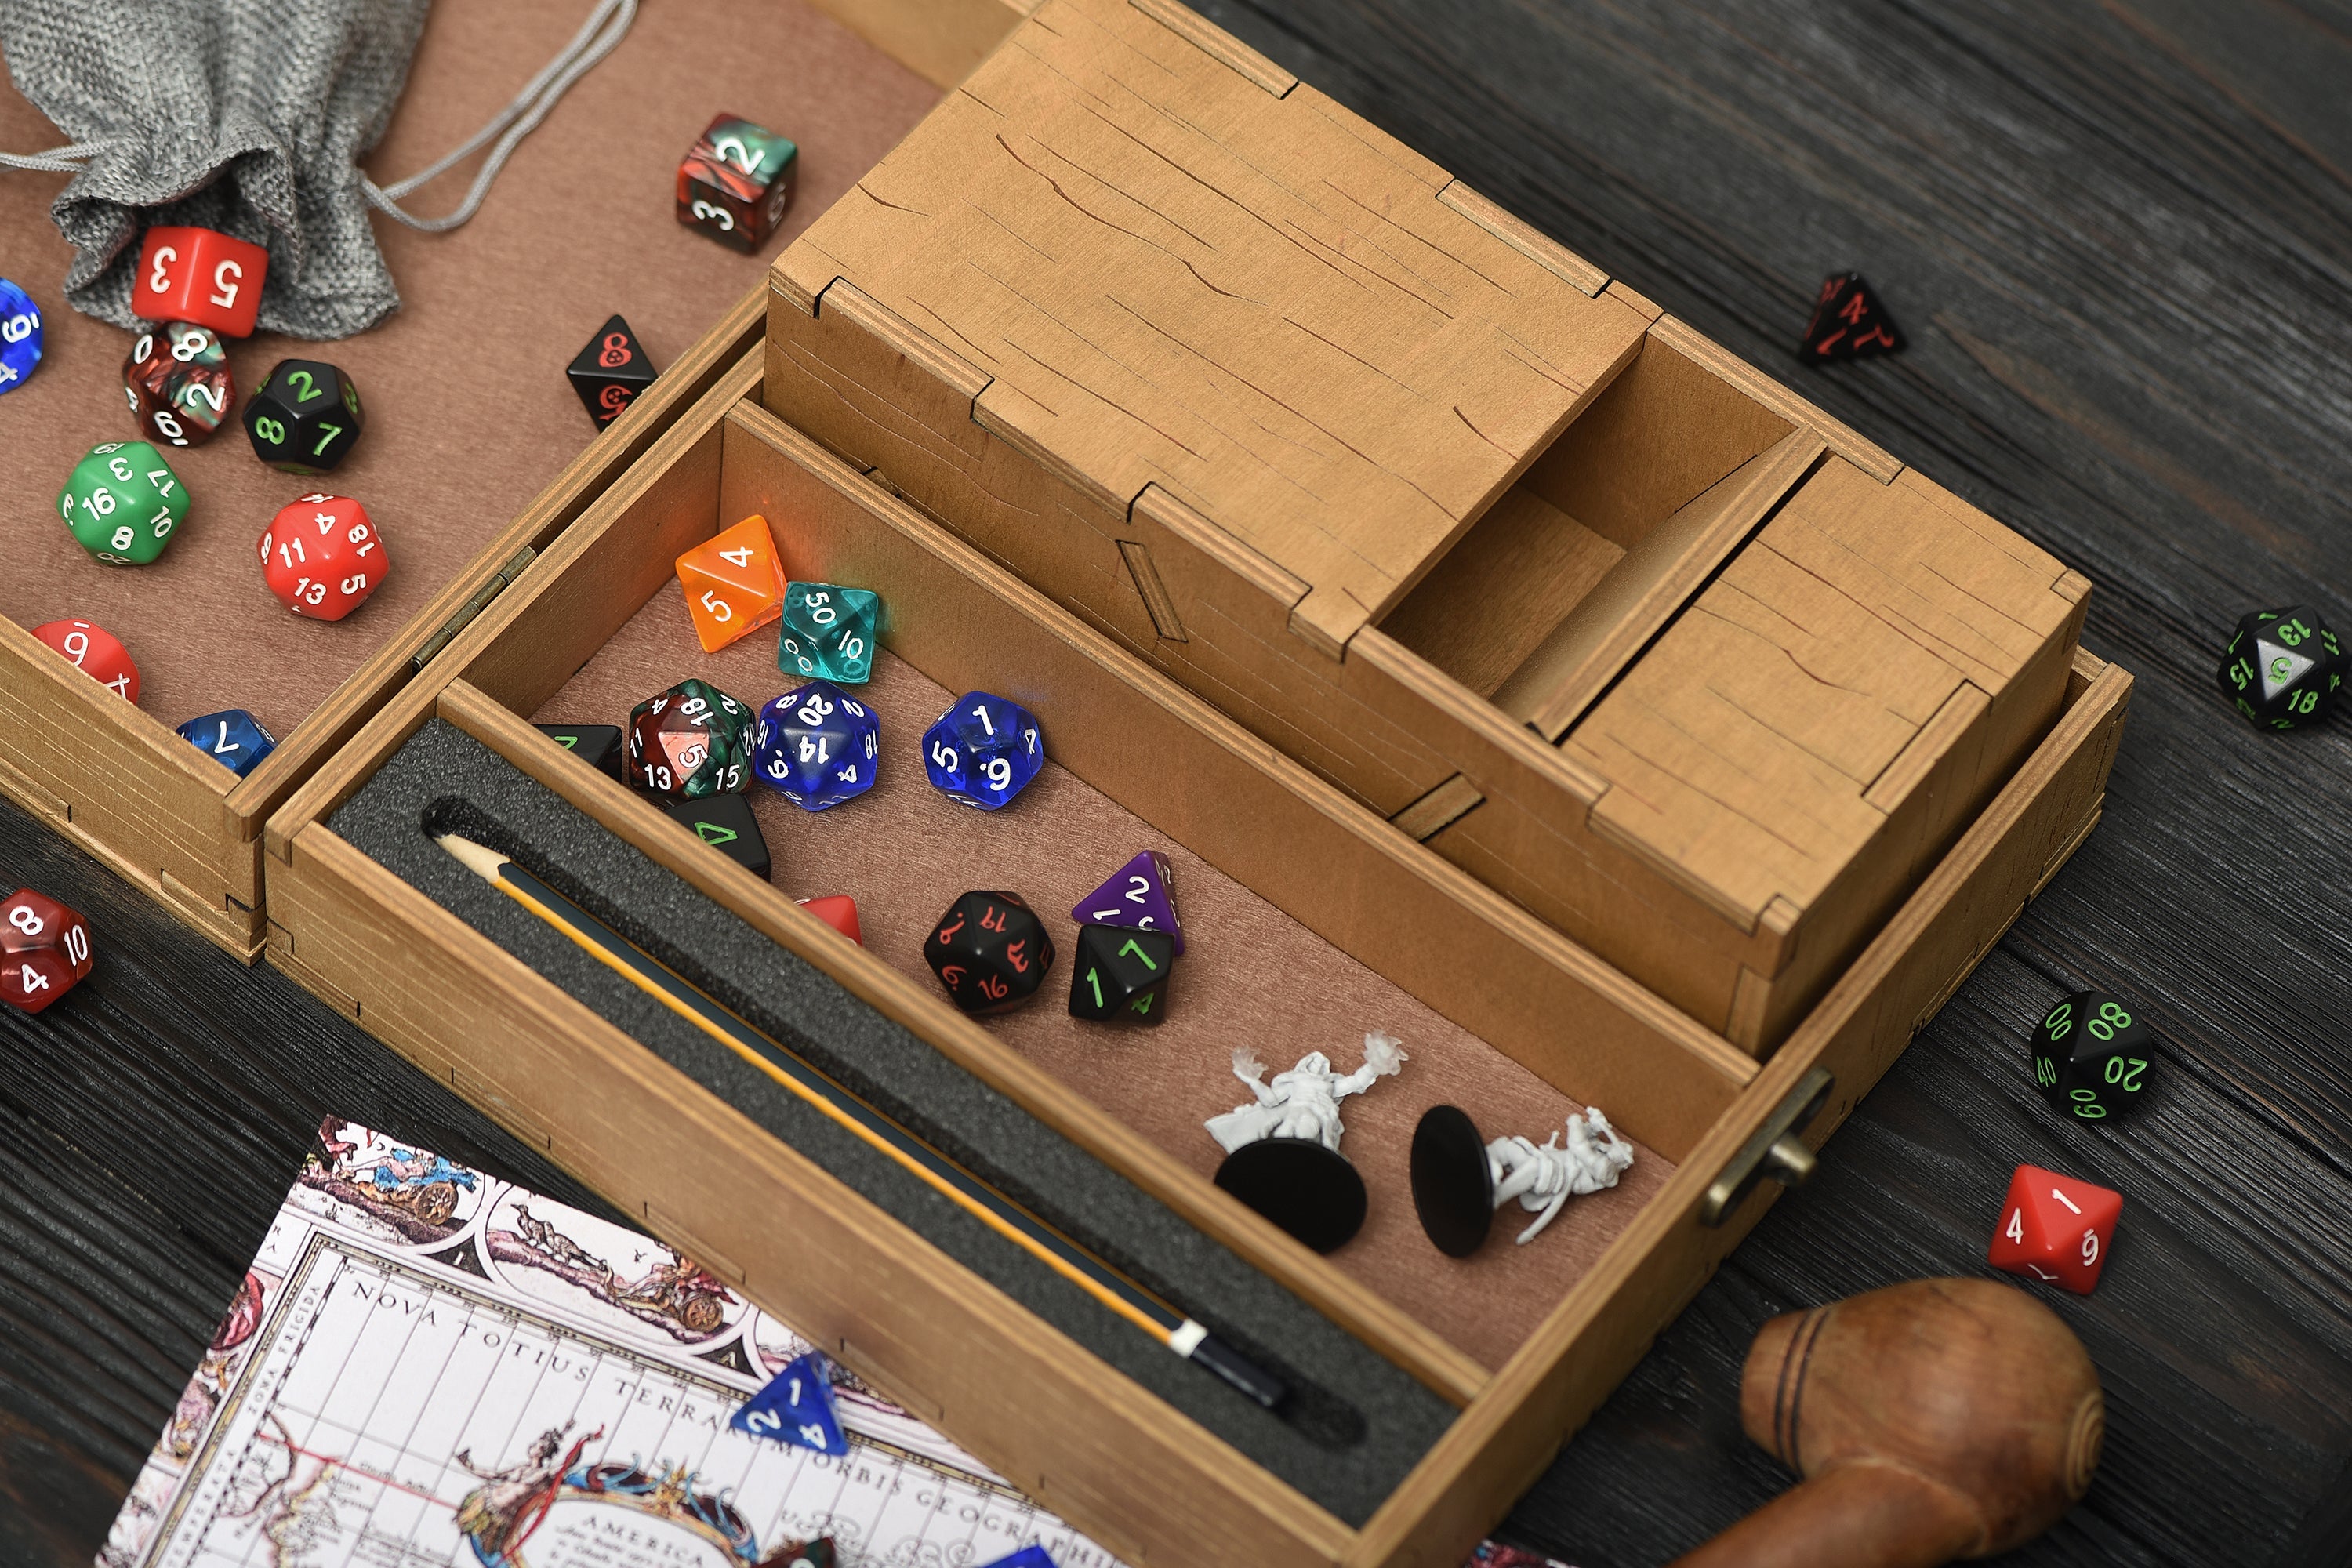 Dice rolling tray with dice tower, Dice boxes and trays, Dice towers - GravisCup